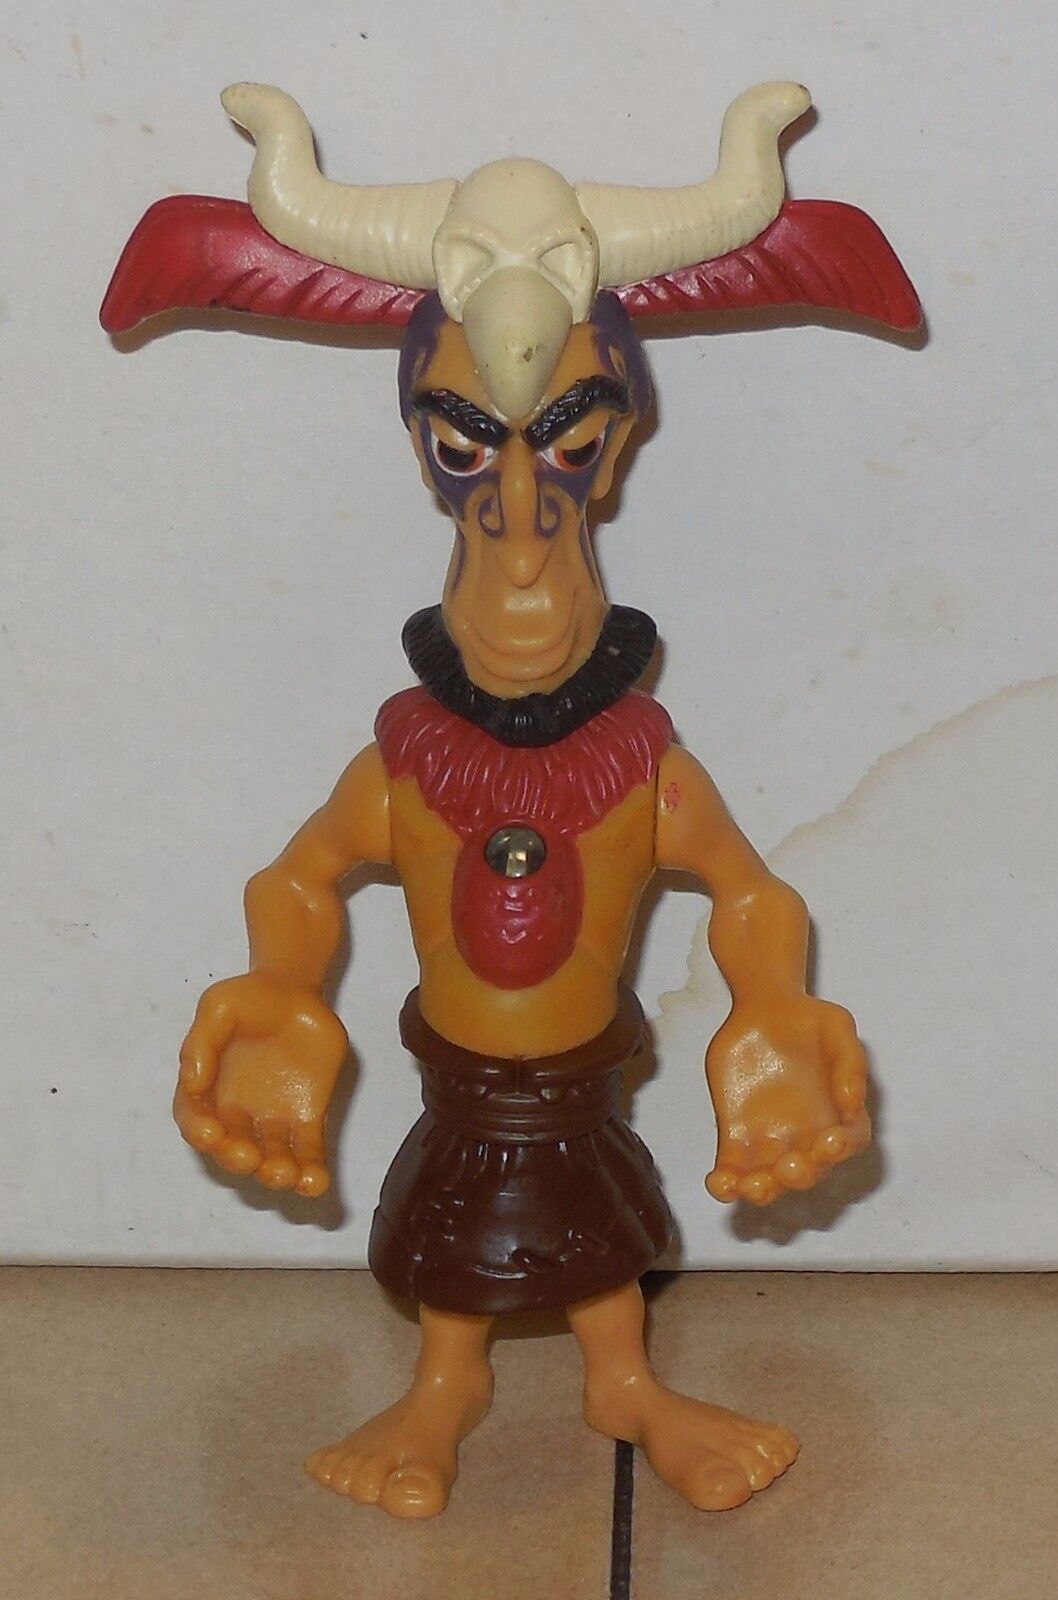 Primary image for 2005 Mcdonalds Happy Meal Toy Nickelodeon's TAK #3 Tlaloc